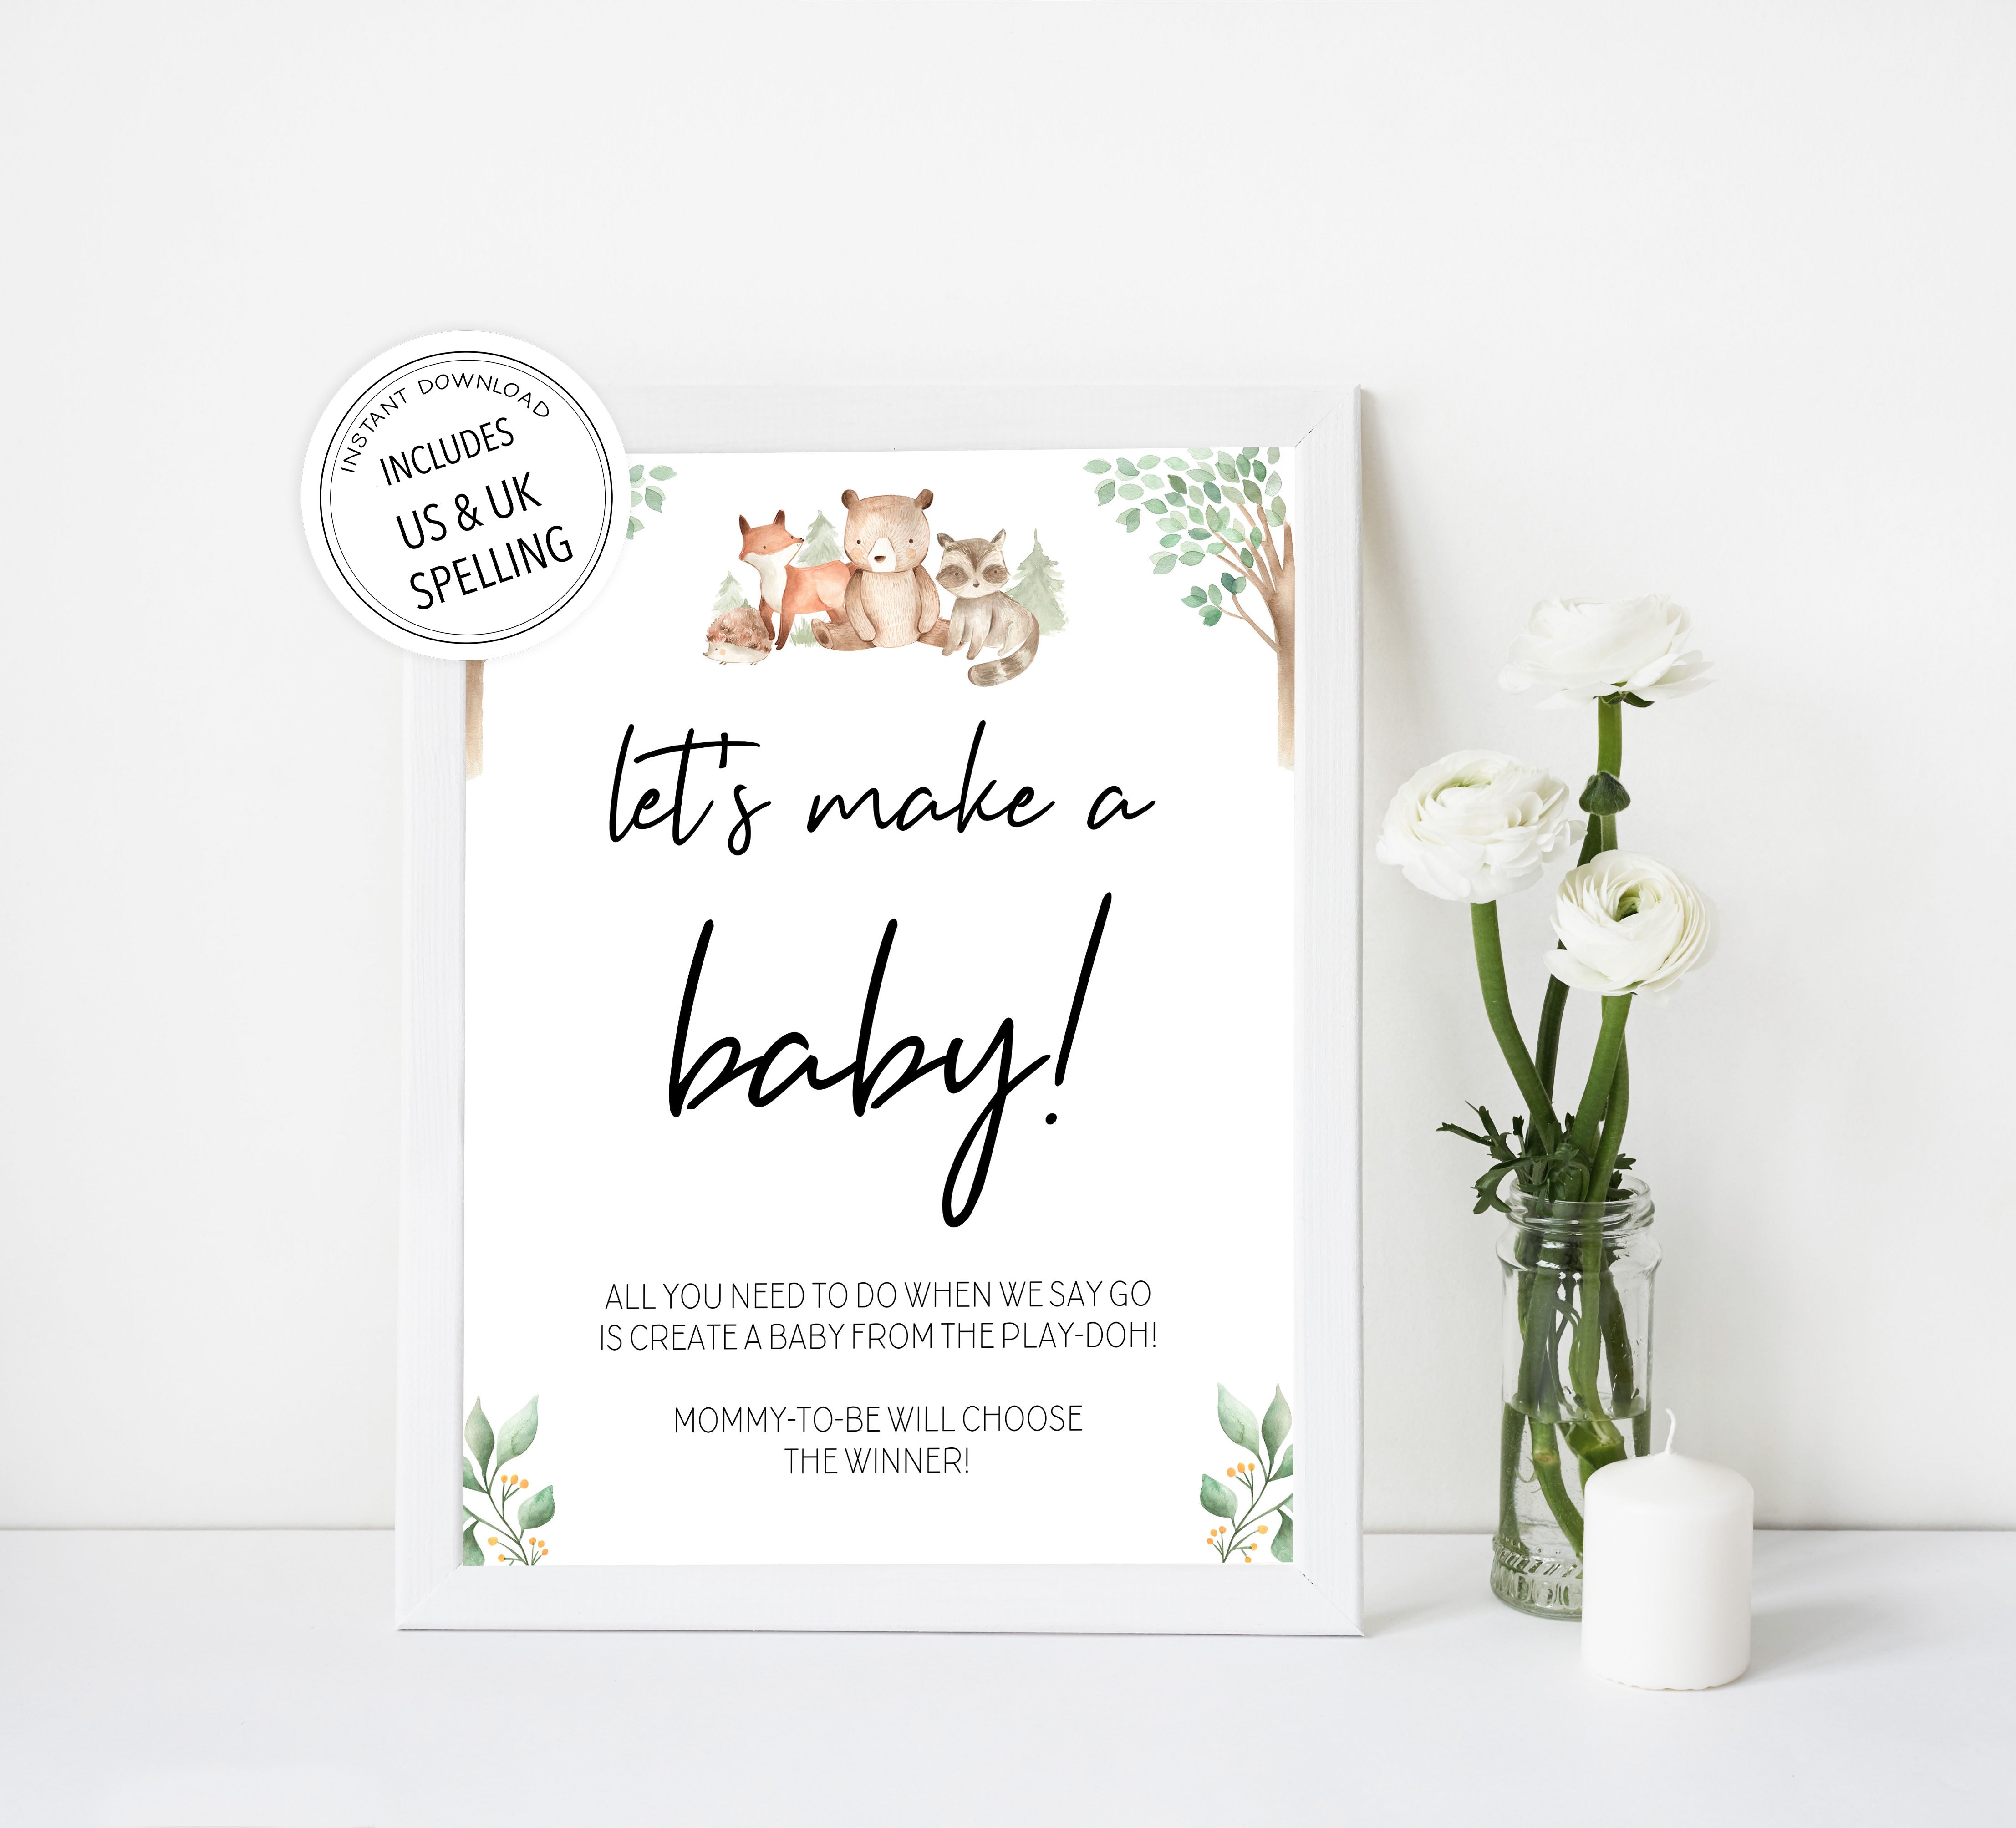 lets make a baby game, Printable baby shower games, woodland animals baby games, baby shower games, fun baby shower ideas, top baby shower ideas, woodland baby shower, baby shower games, fun woodland animals baby shower ideas